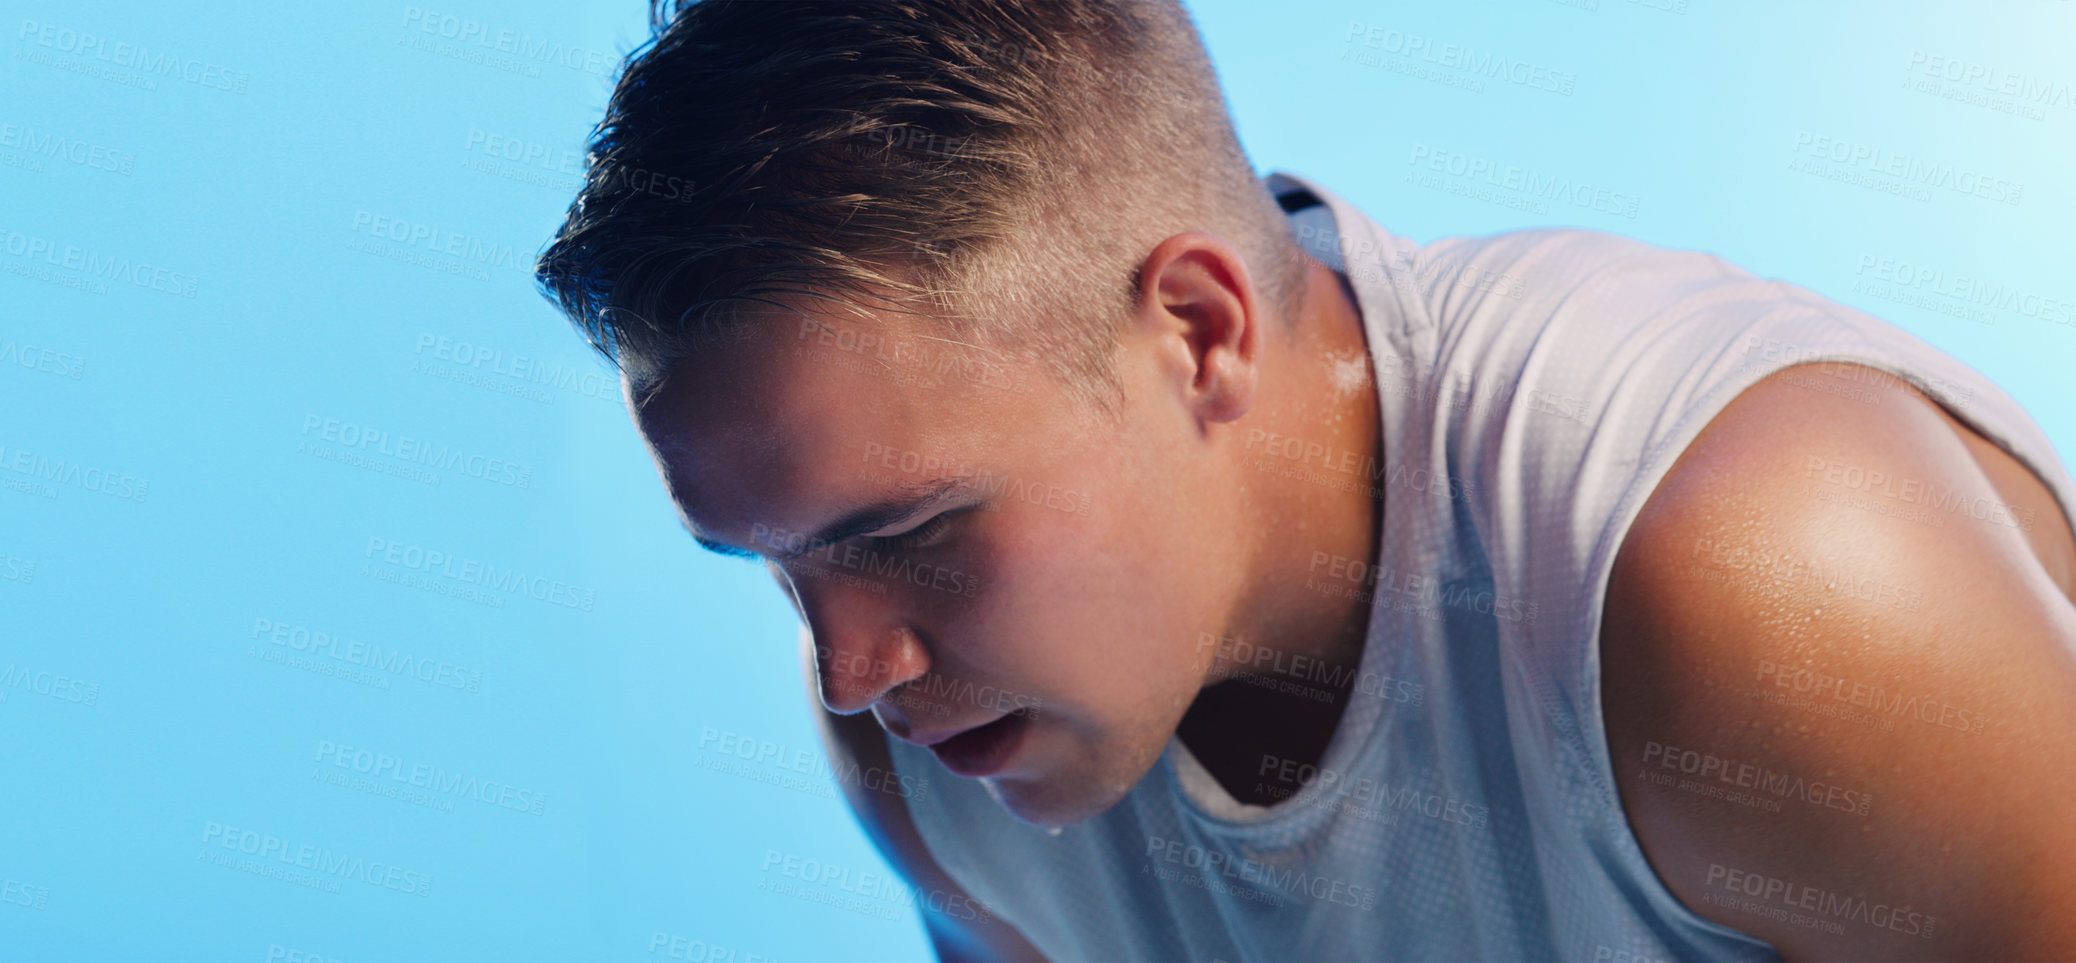 Buy stock photo Studio shot of a handsome young man hunched over against a blue background